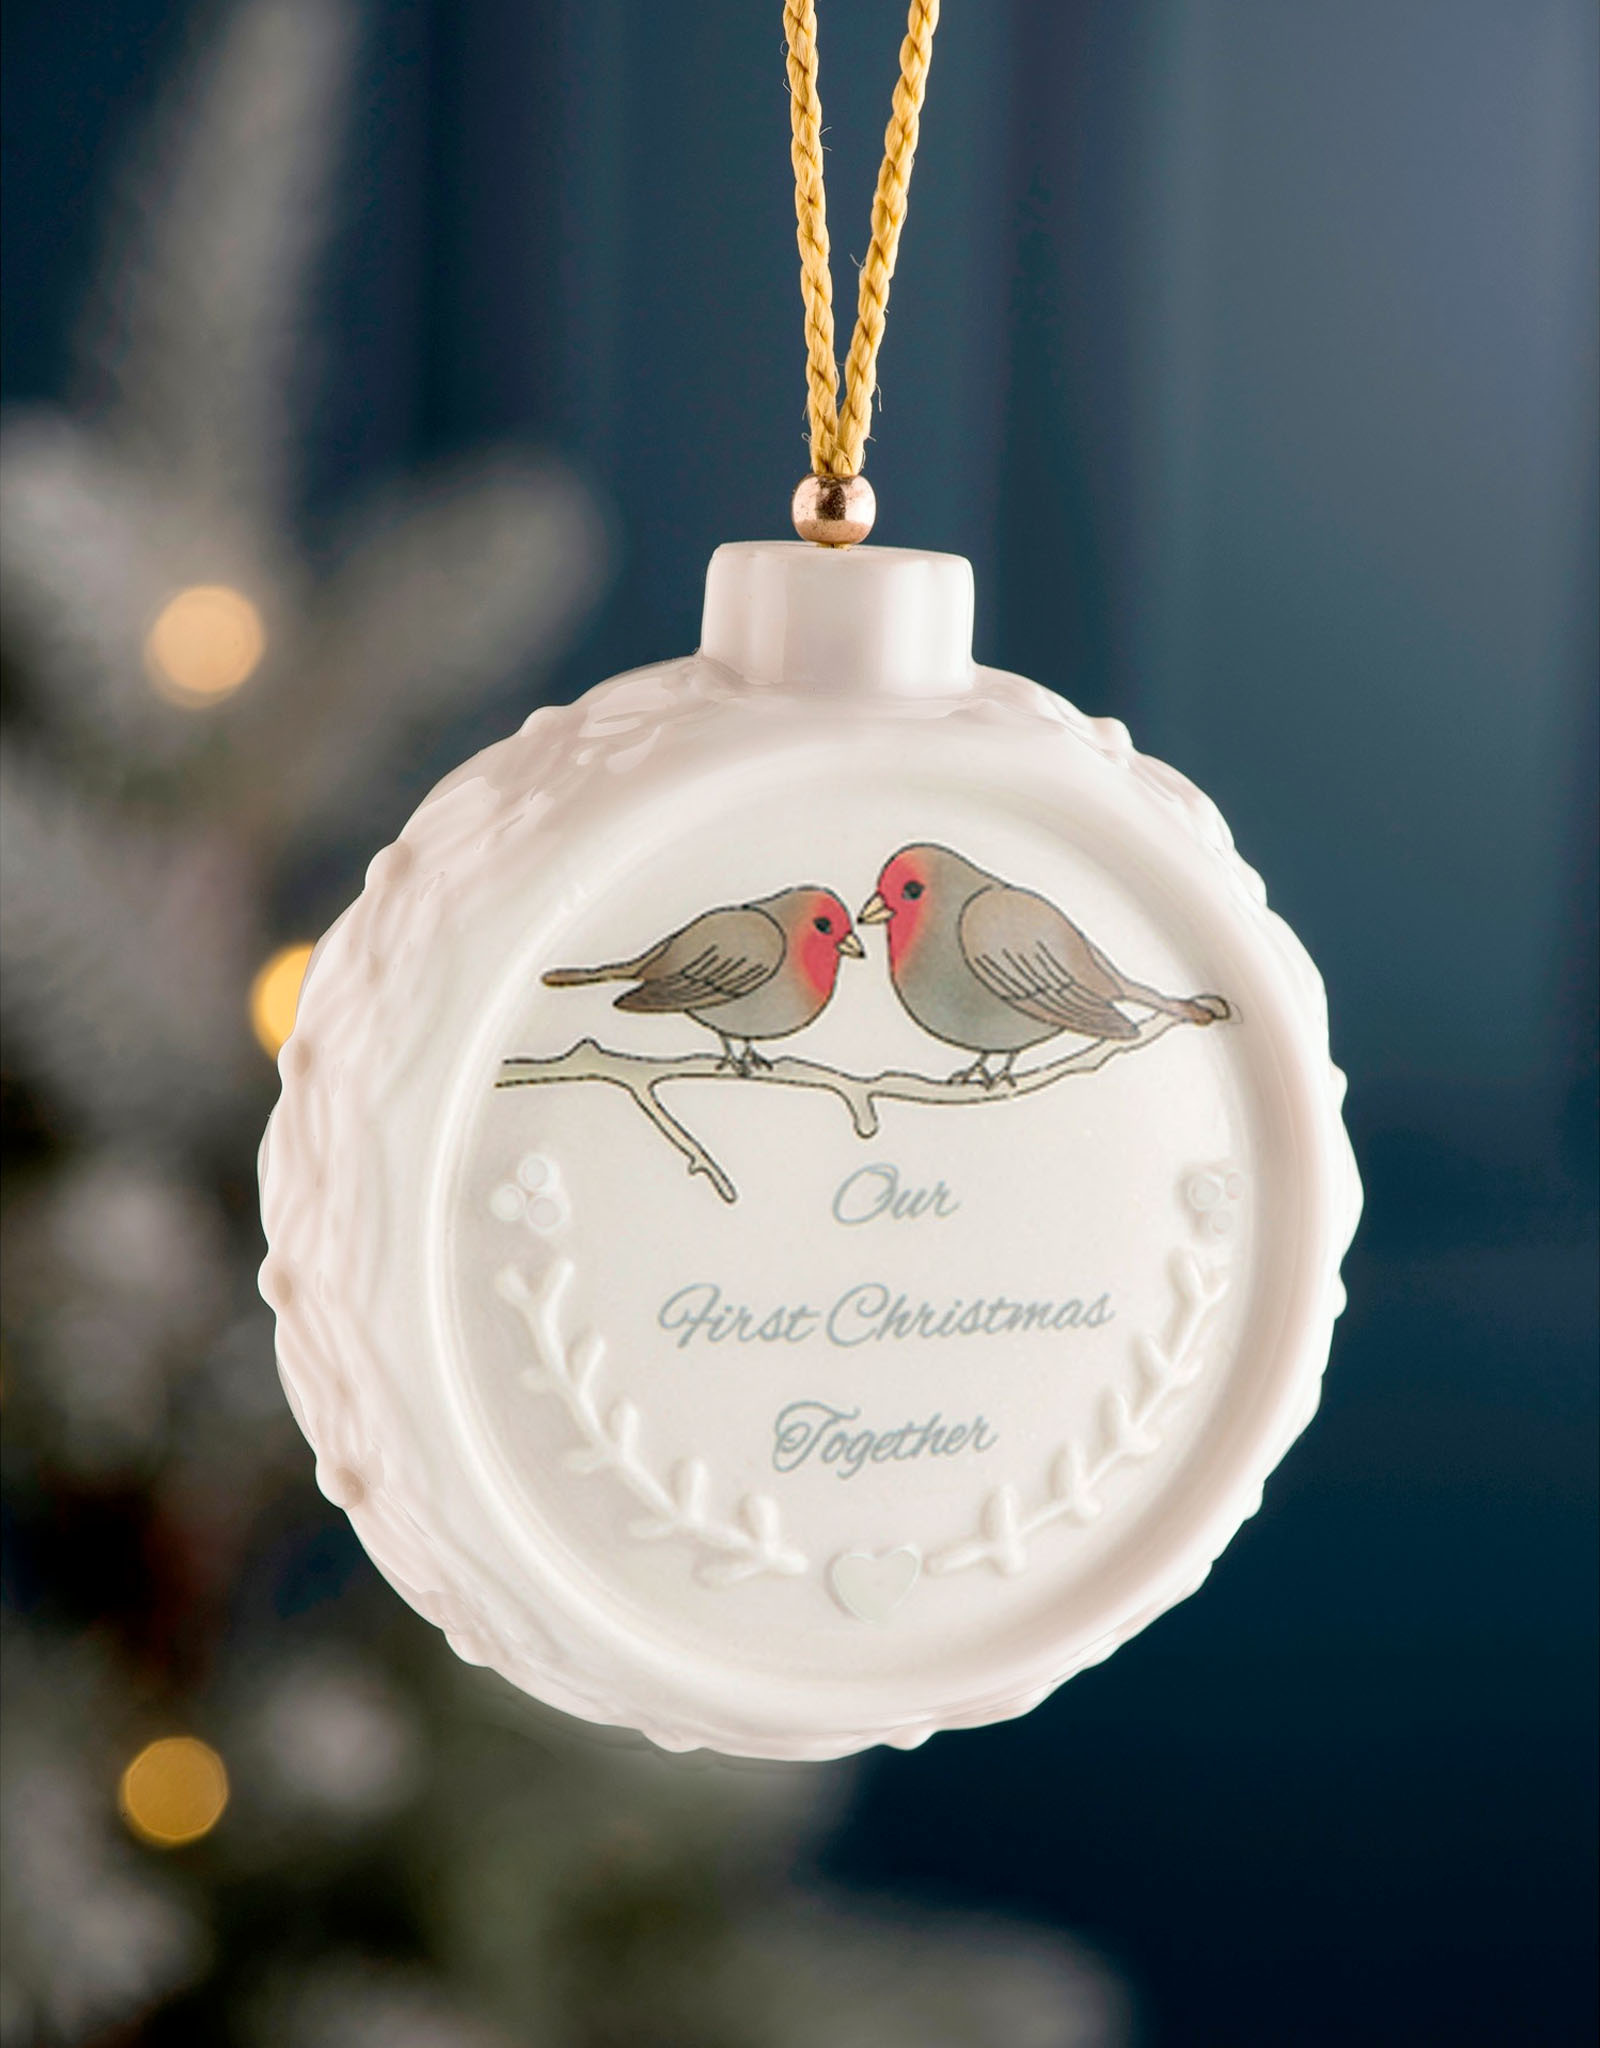 ORNAMENTS BELLEEK ORNAMENT - 'Our First Christmas Together' w. Birds